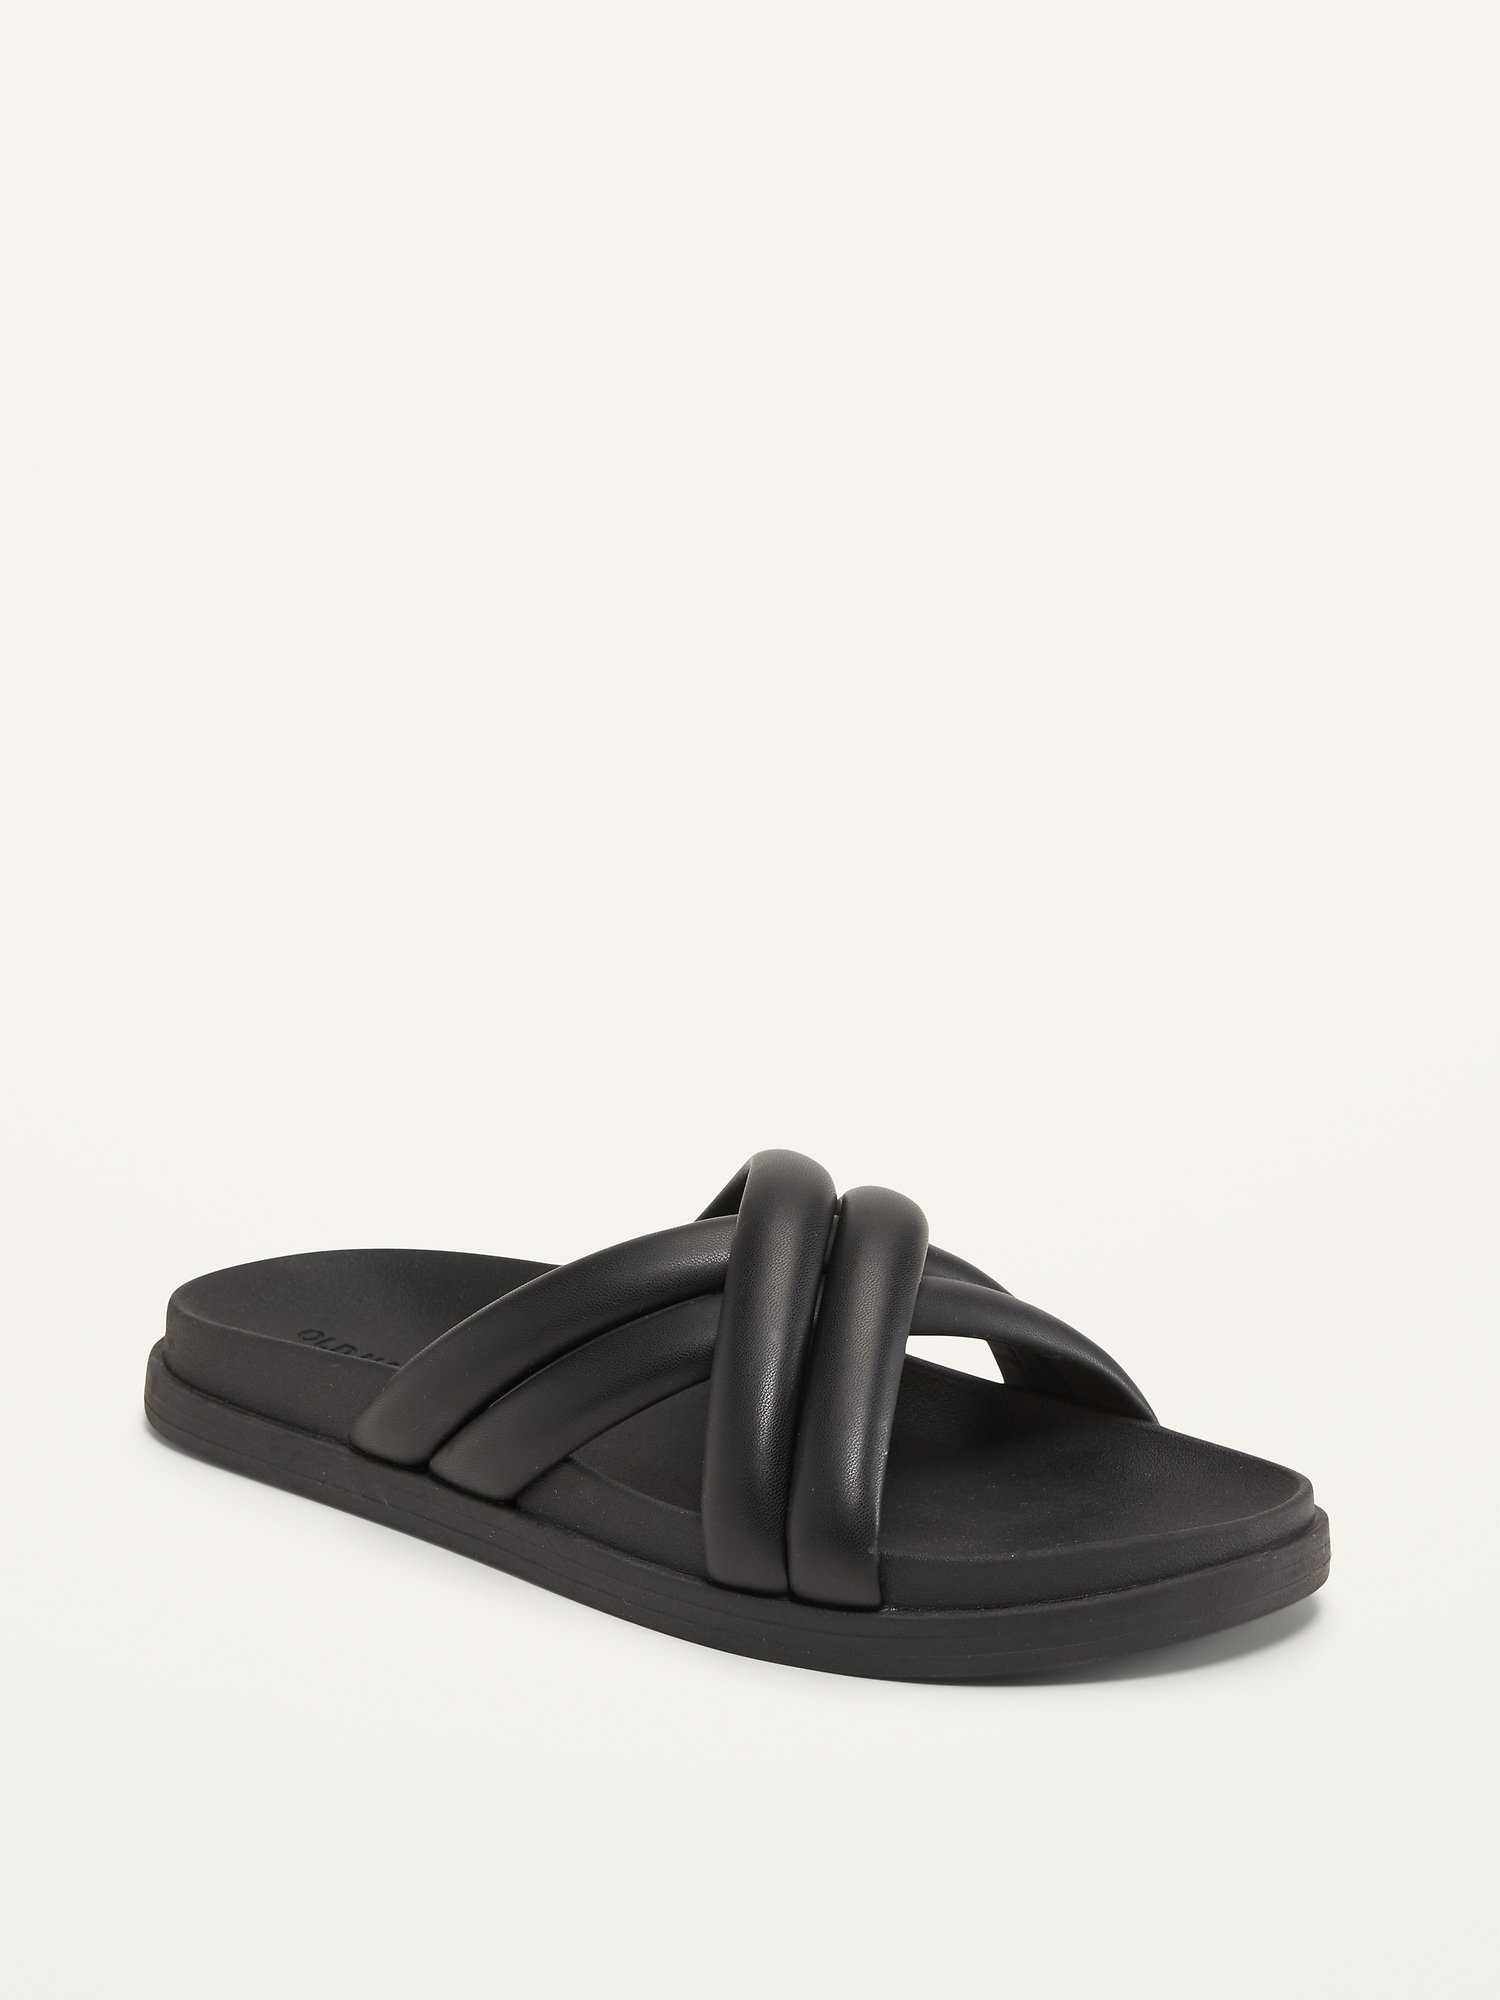 Faux-Leather Puff Cross-Strap Sandals for Women | Old Navy